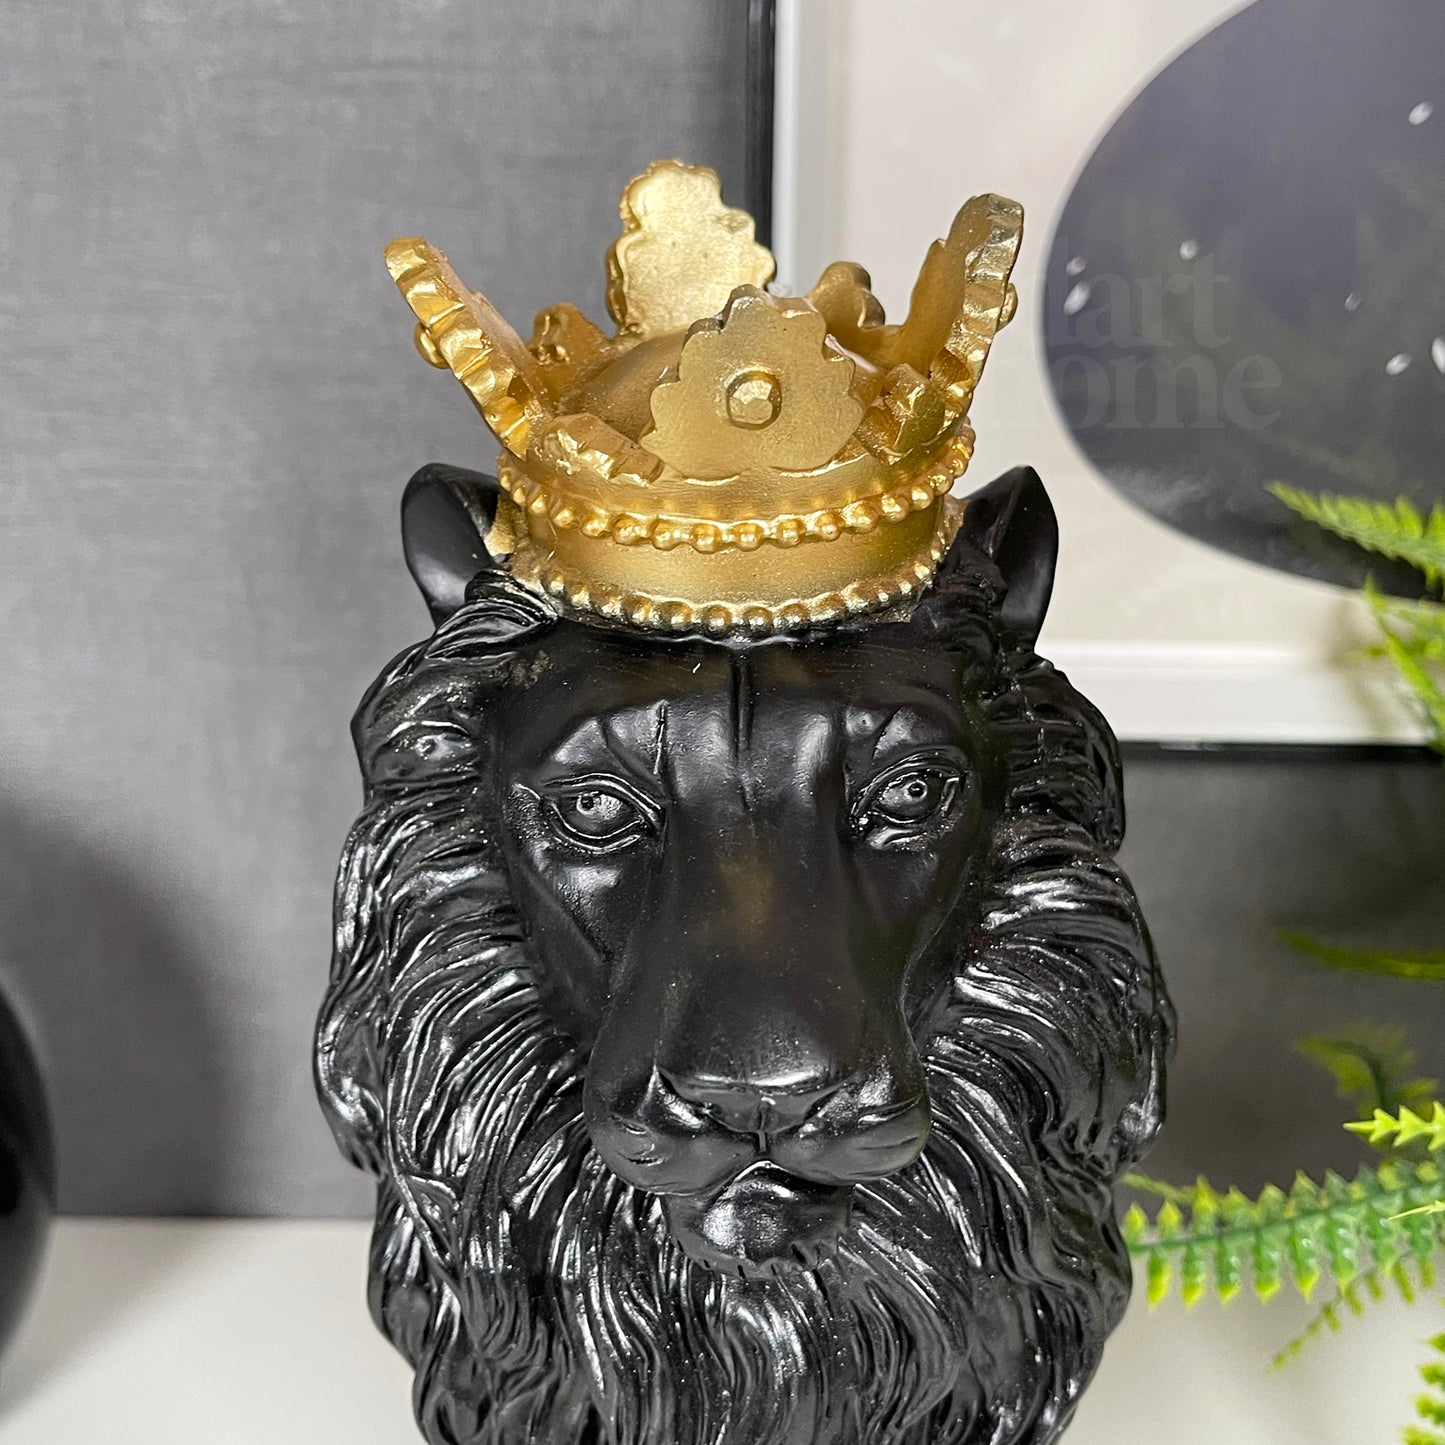 Black Royal Lion With Gold Crown Statue